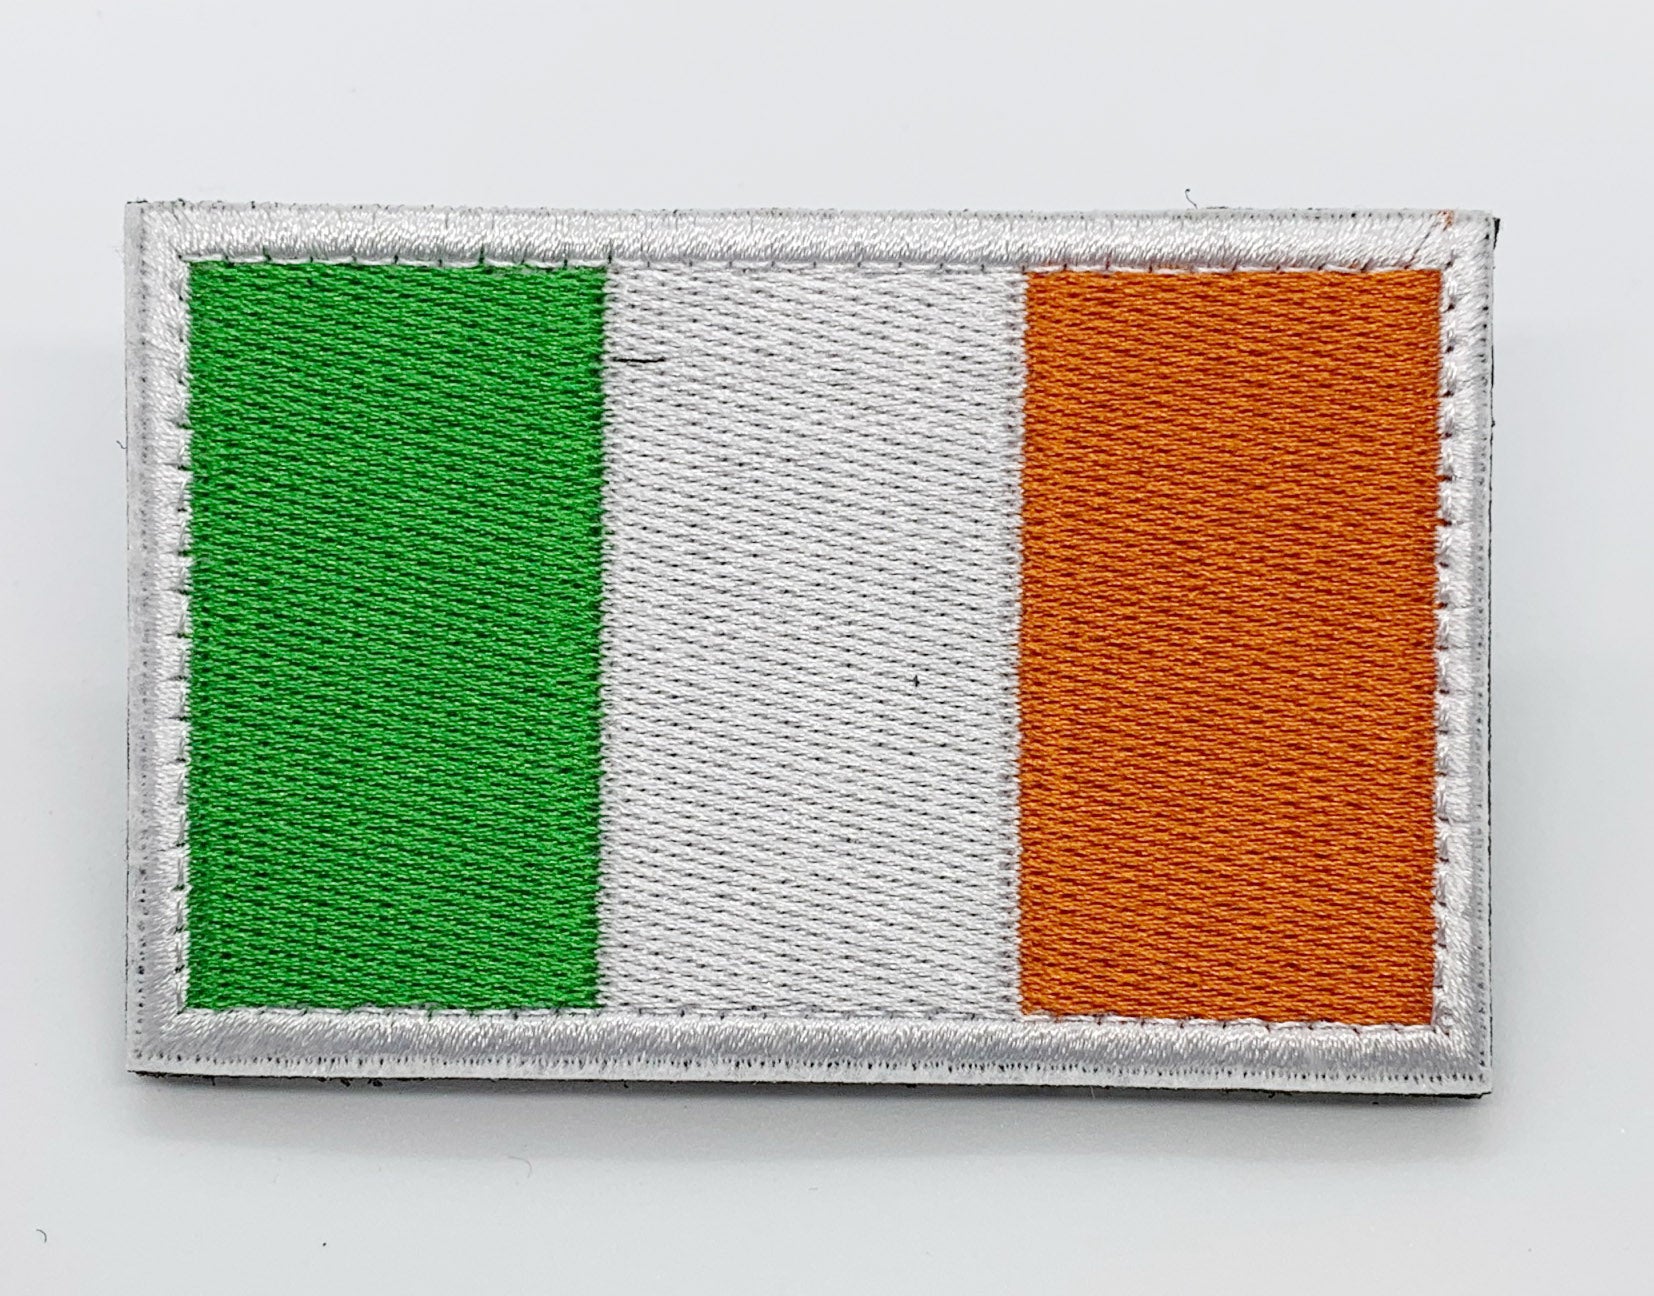 Ireland Flag Patch Hook & Loop  Size: 8x5cm   HOOK AND LOOP BACKED PATCH(BOTH PROVIDED)